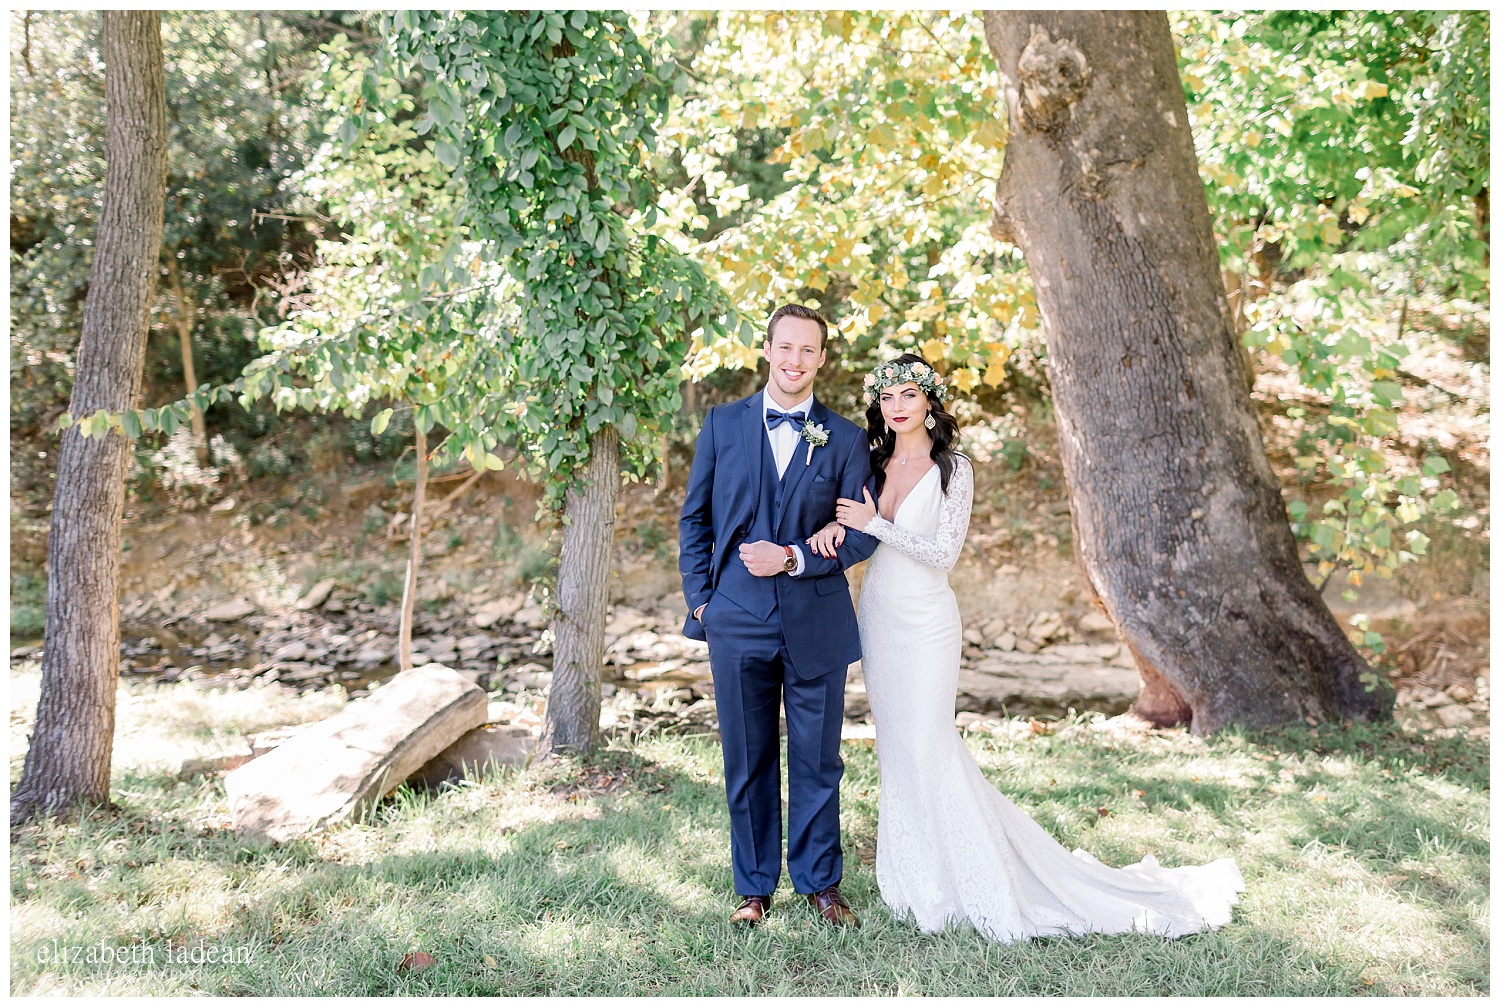 Willow-Creek-Blush-and-Blues-Outdoor-Wedding-Photography-S+Z2018-elizabeth-ladean-photography-photo_0539.jpg